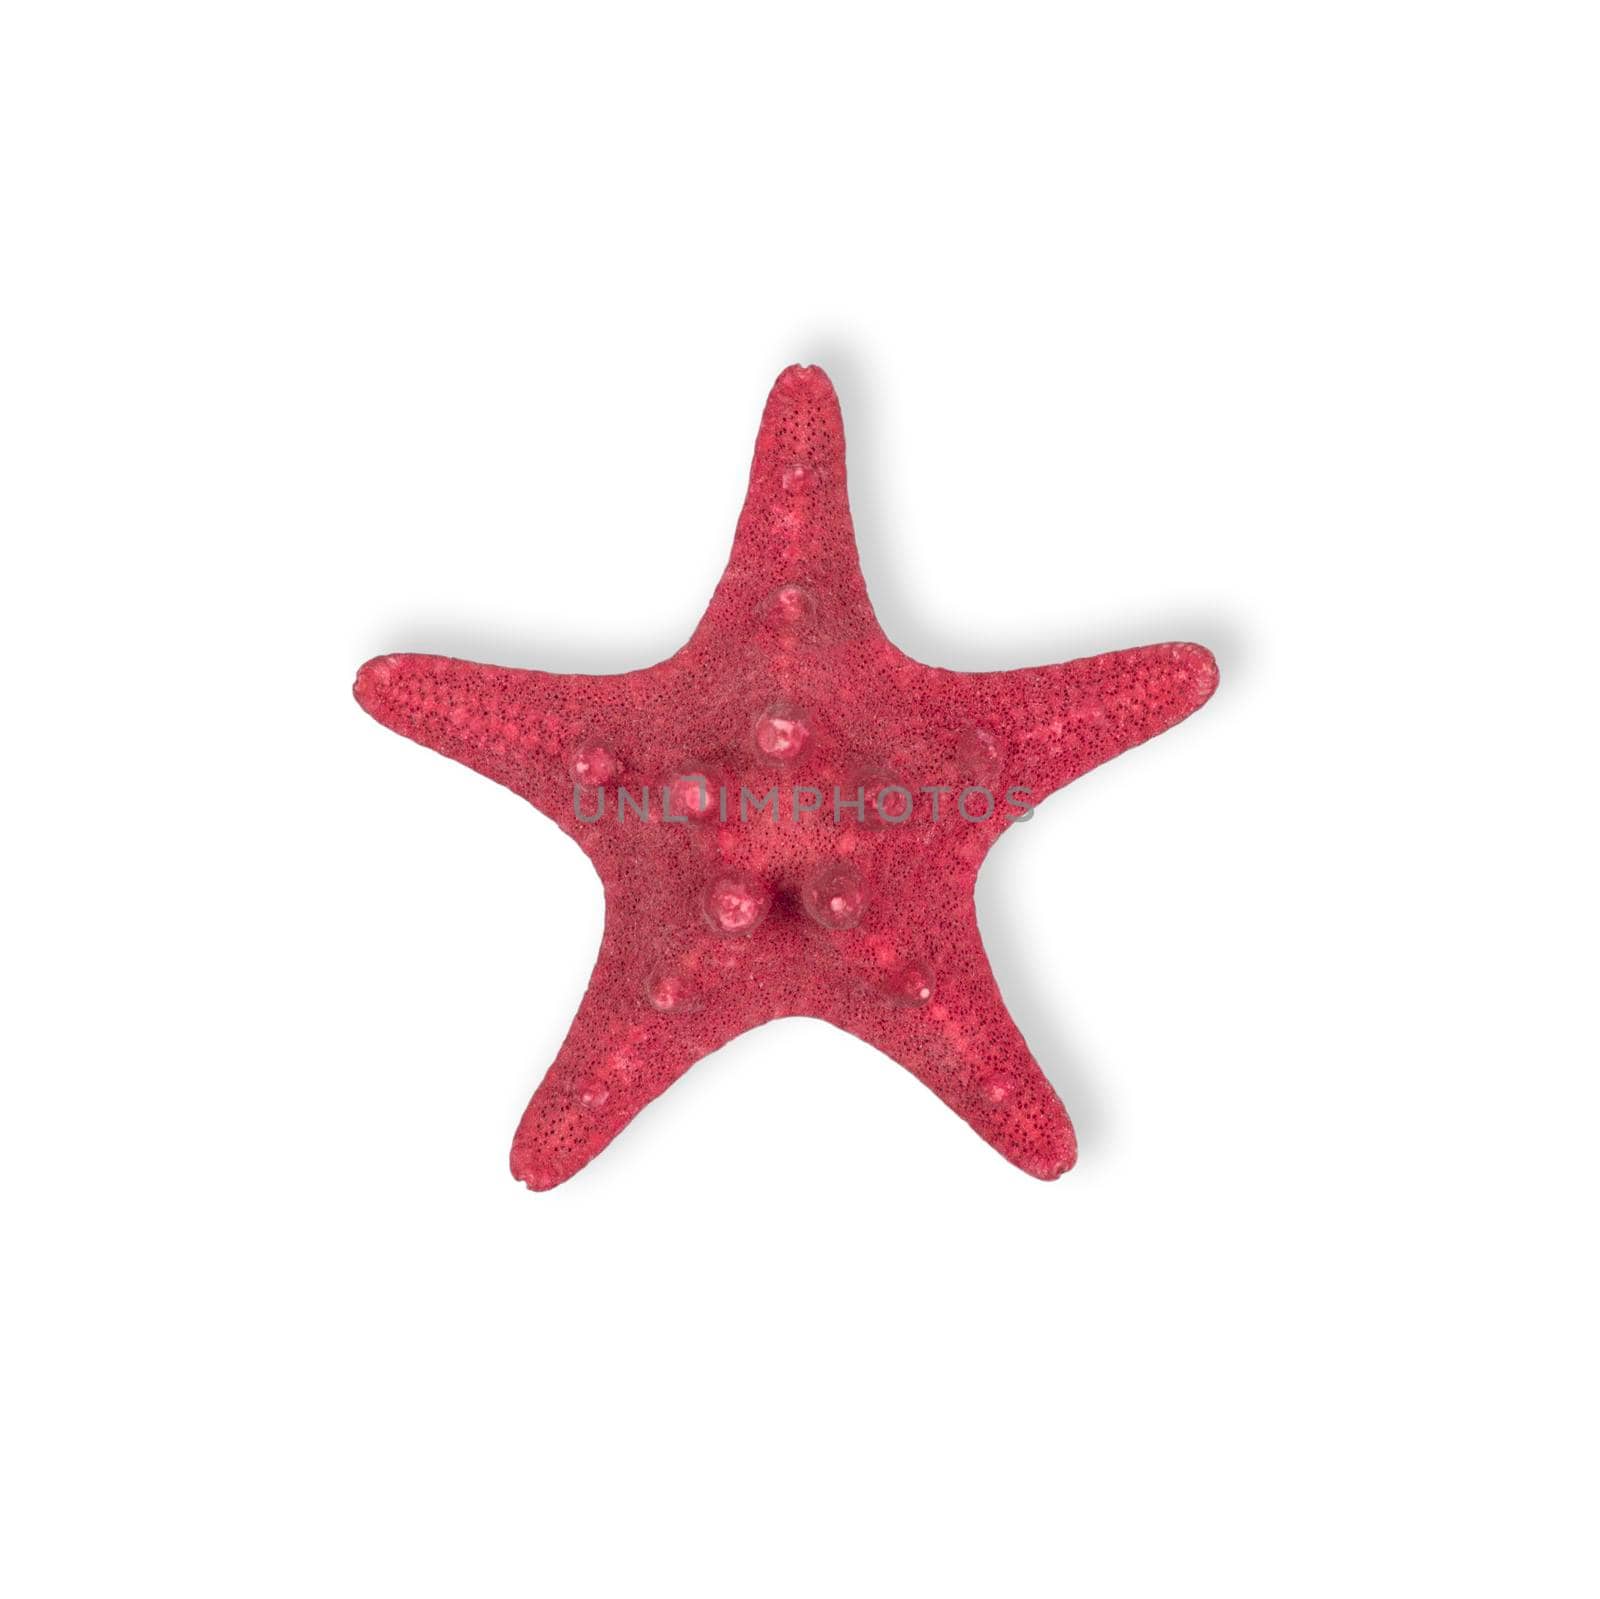 Dried Red sea star fish isolated on white background. Top view.